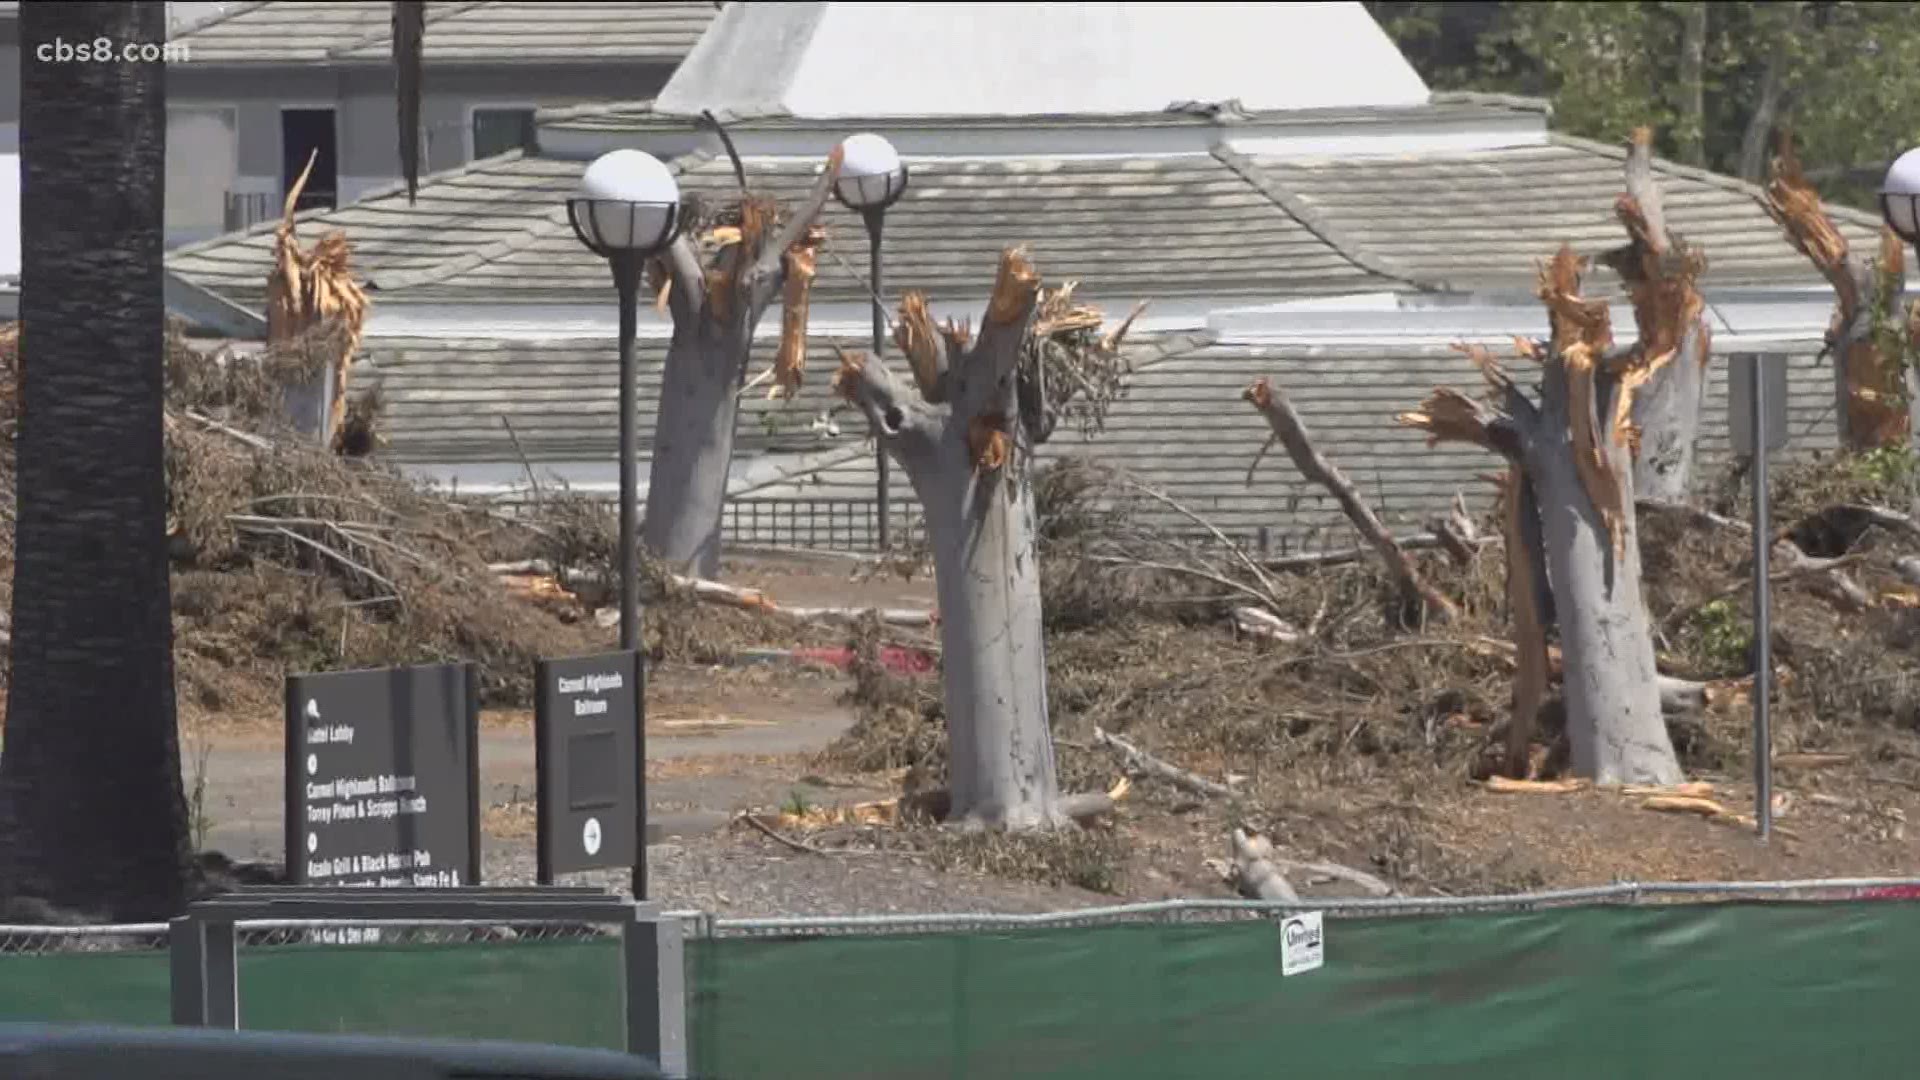 Neighbors expressed outrage after the decades-old trees were left as chopped up stumps or piles of debris in the neighborhood